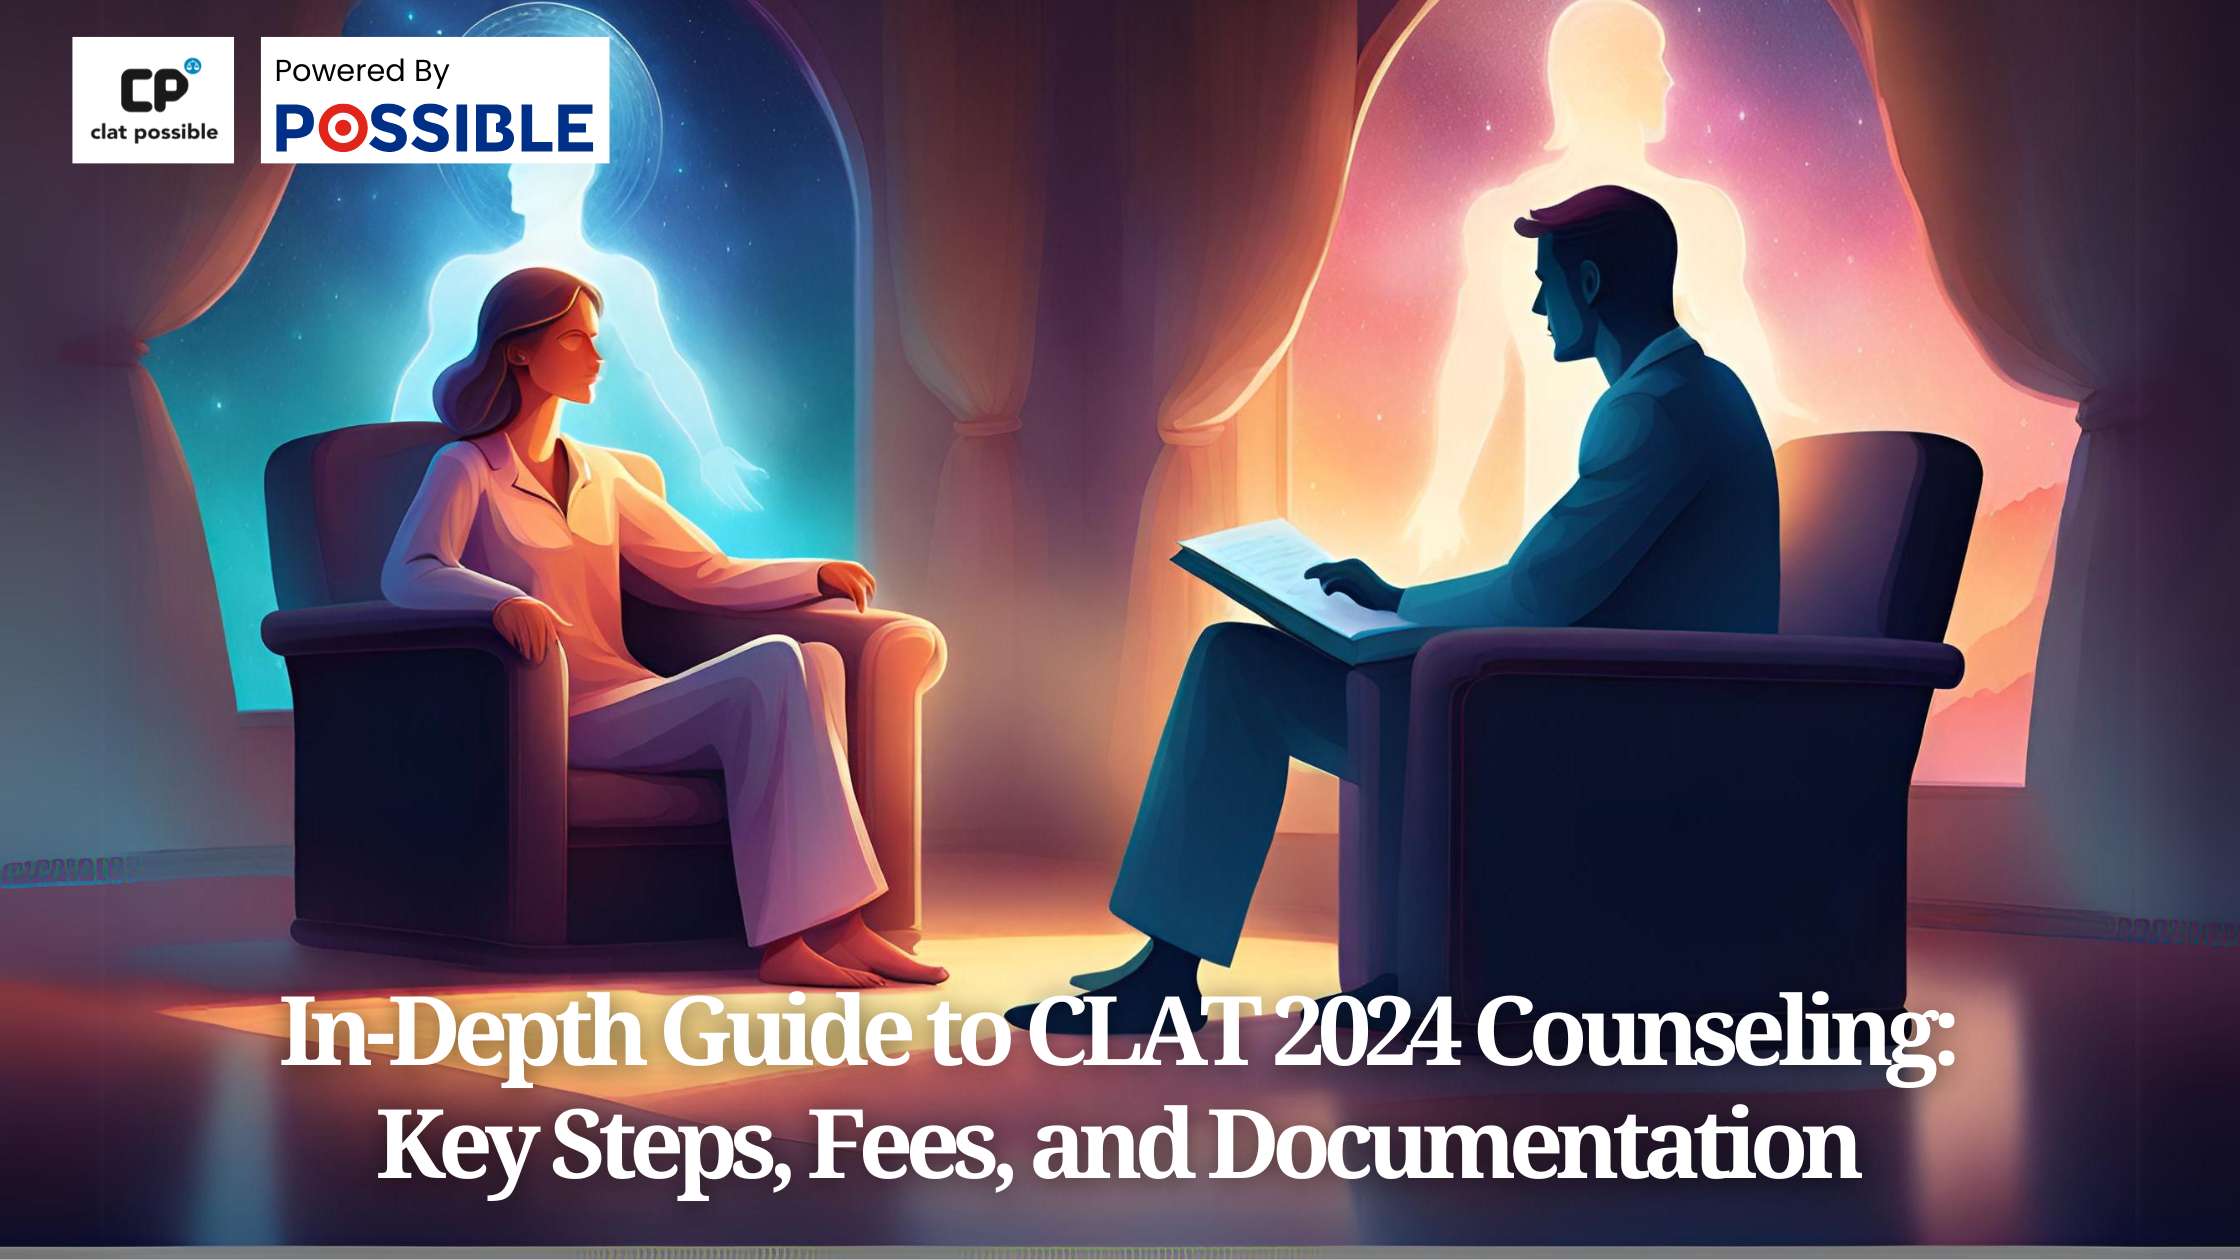 CLAT 2024 Counseling